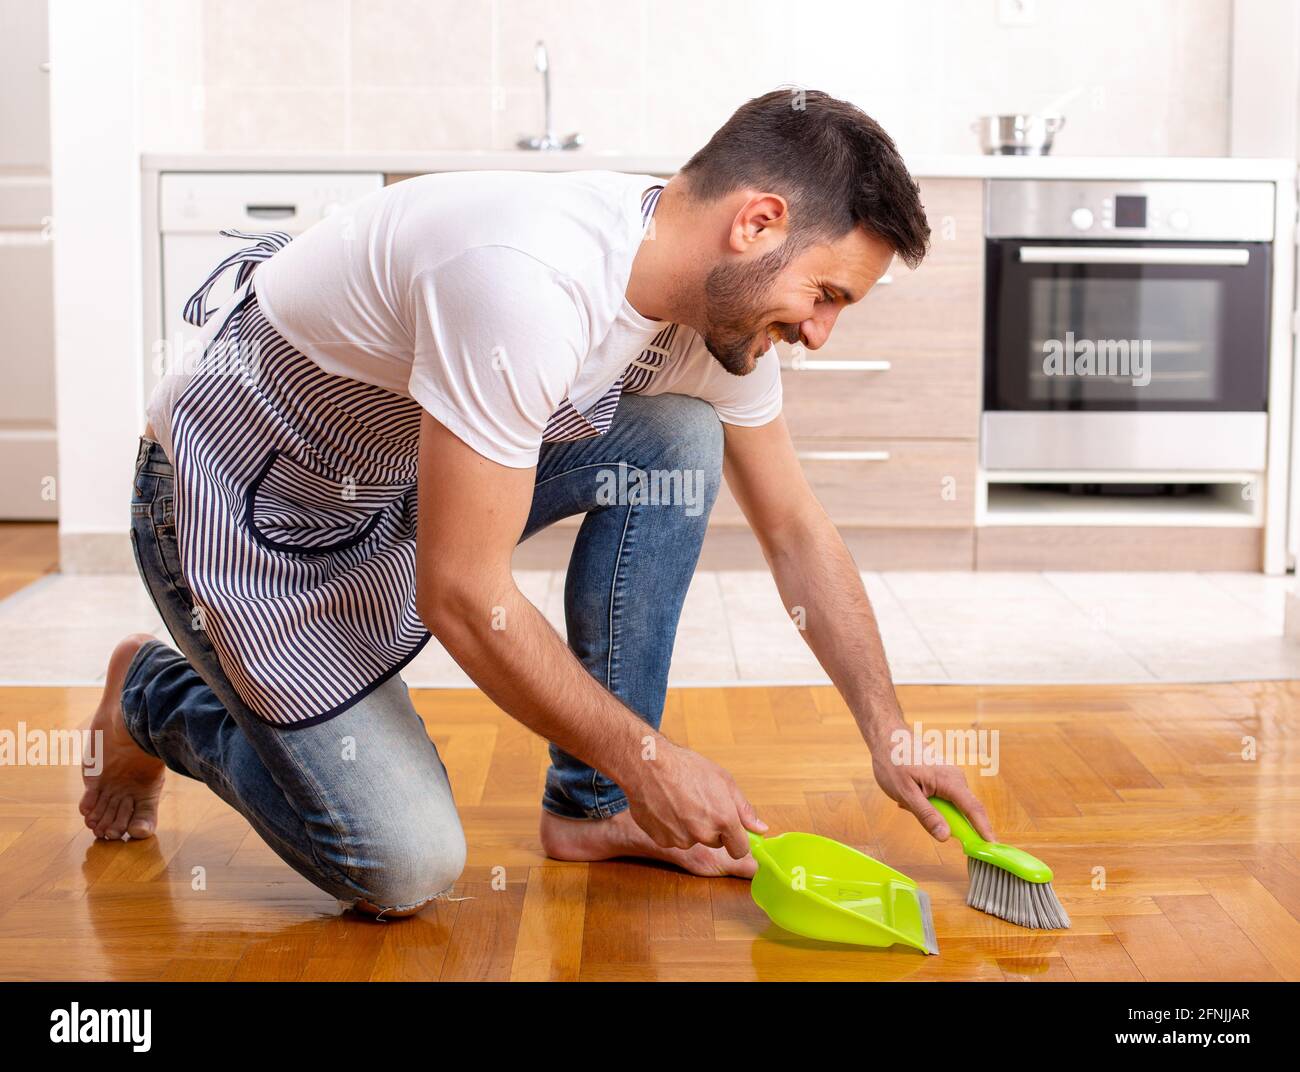 Handsome man sweeping floor with dust pan in front of kitchen cabinets at home Stock Photo